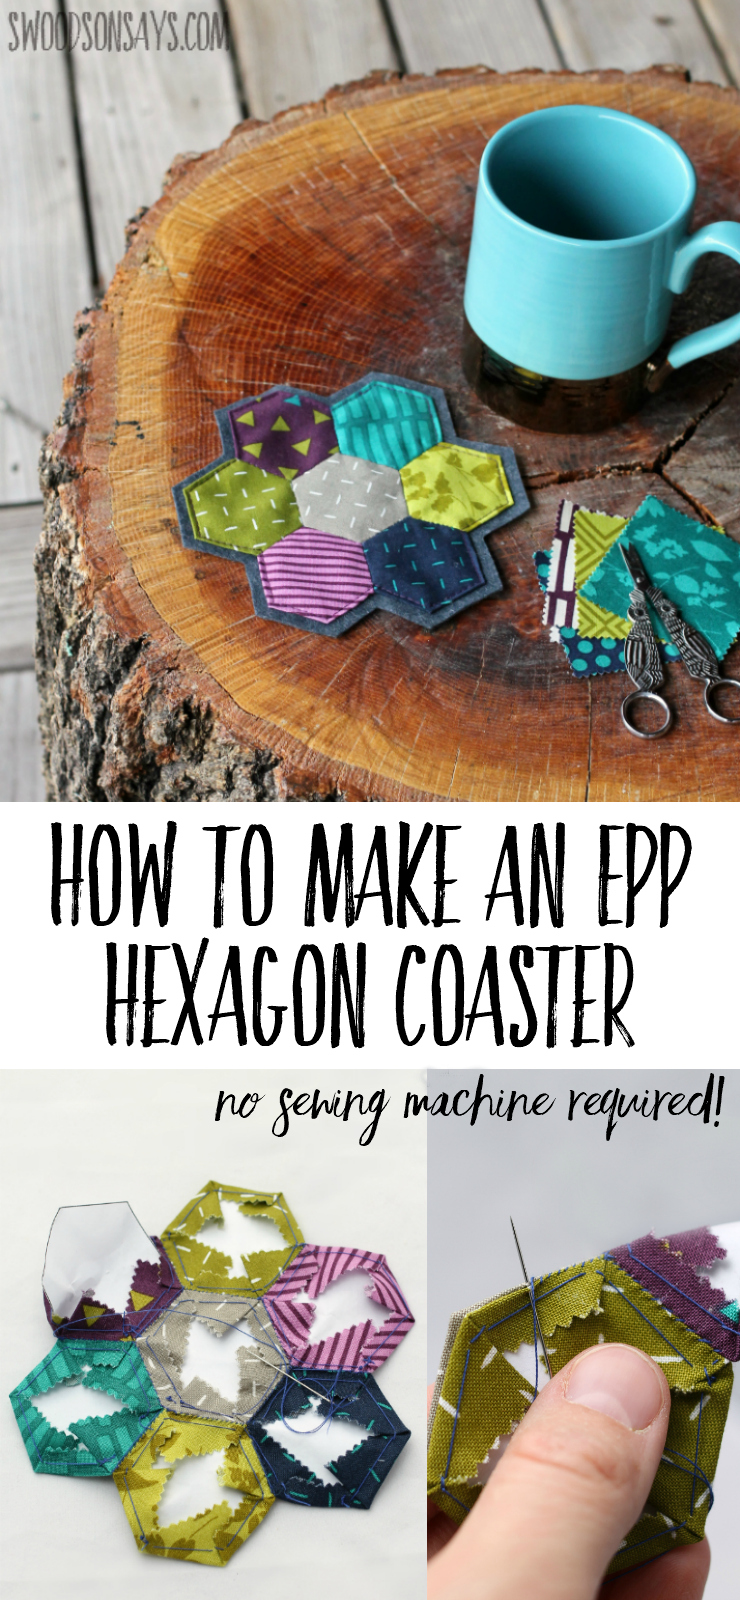 Use up your littlest scraps, sit down and take some quiet time to sew this english paper pieced hexagon coaster! No sewing machine required; it is easy to make in a single night and all hand stitched. Pair it with some tea for the perfect diy get well basket! Sponsored post with free tutorial. #epp #hexies #patchworkcoaster #sewing #sewingtutorial